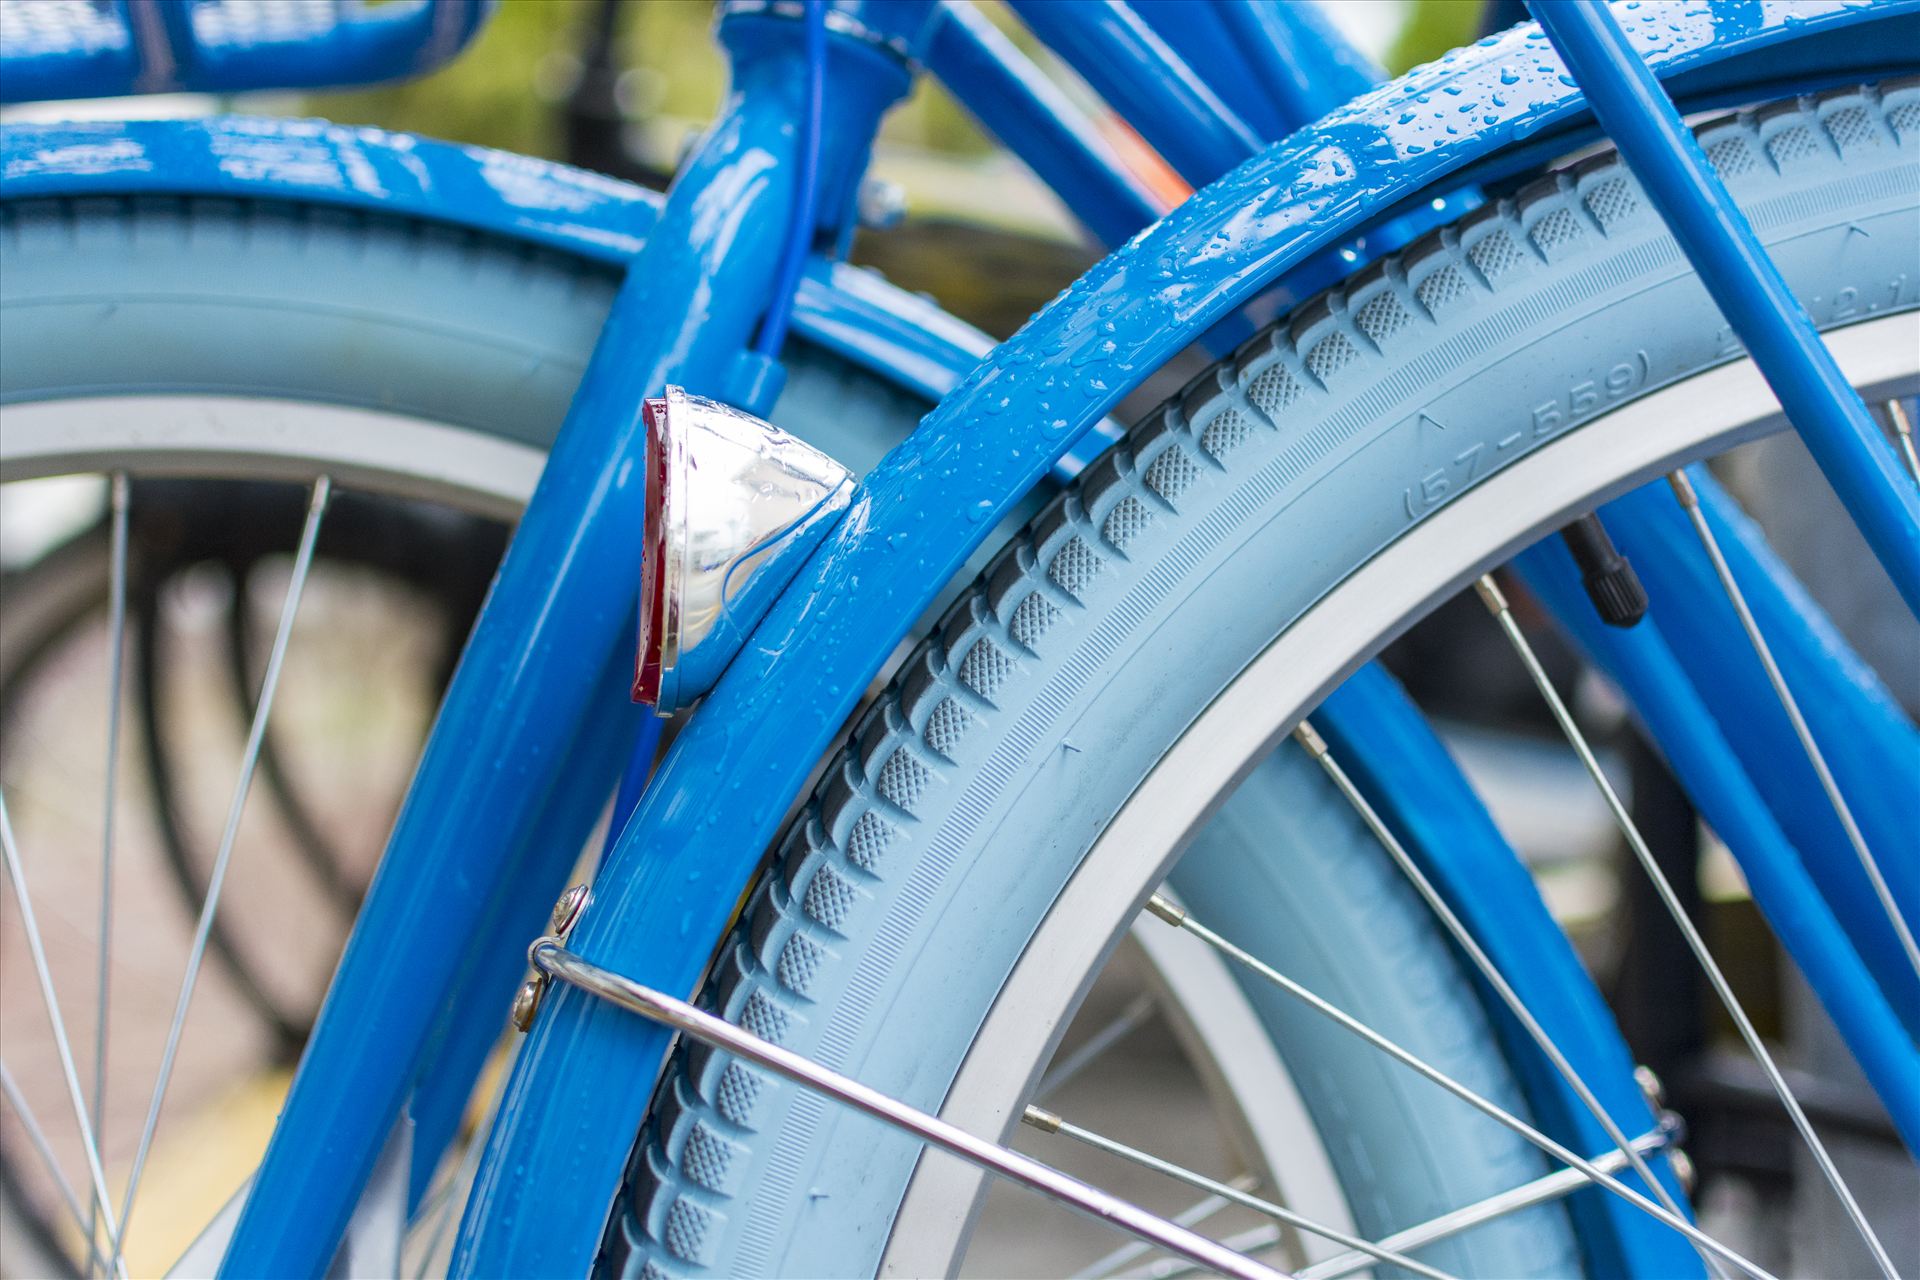 Rainy Blue Bike.jpg - Rain slicked blue bicycle and a Key West morning by Sarah Williams